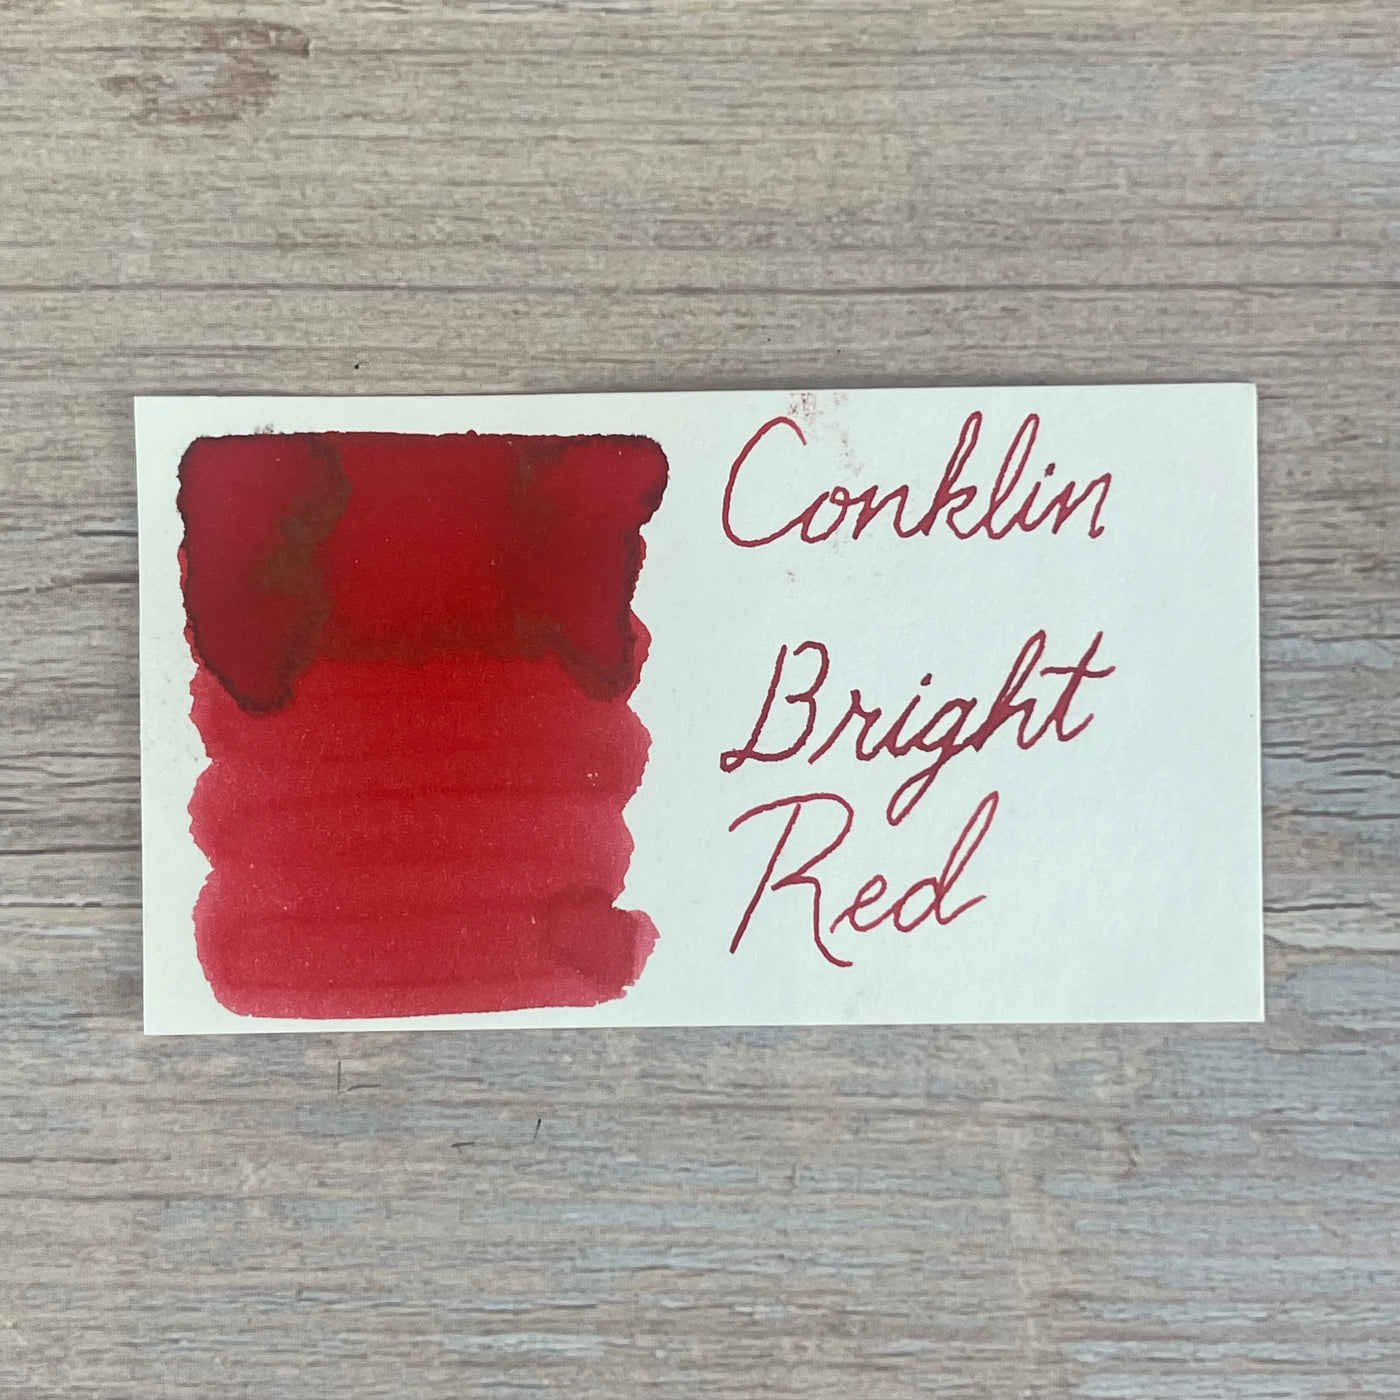 Conklin Bright Red - 60ml Bottled Ink